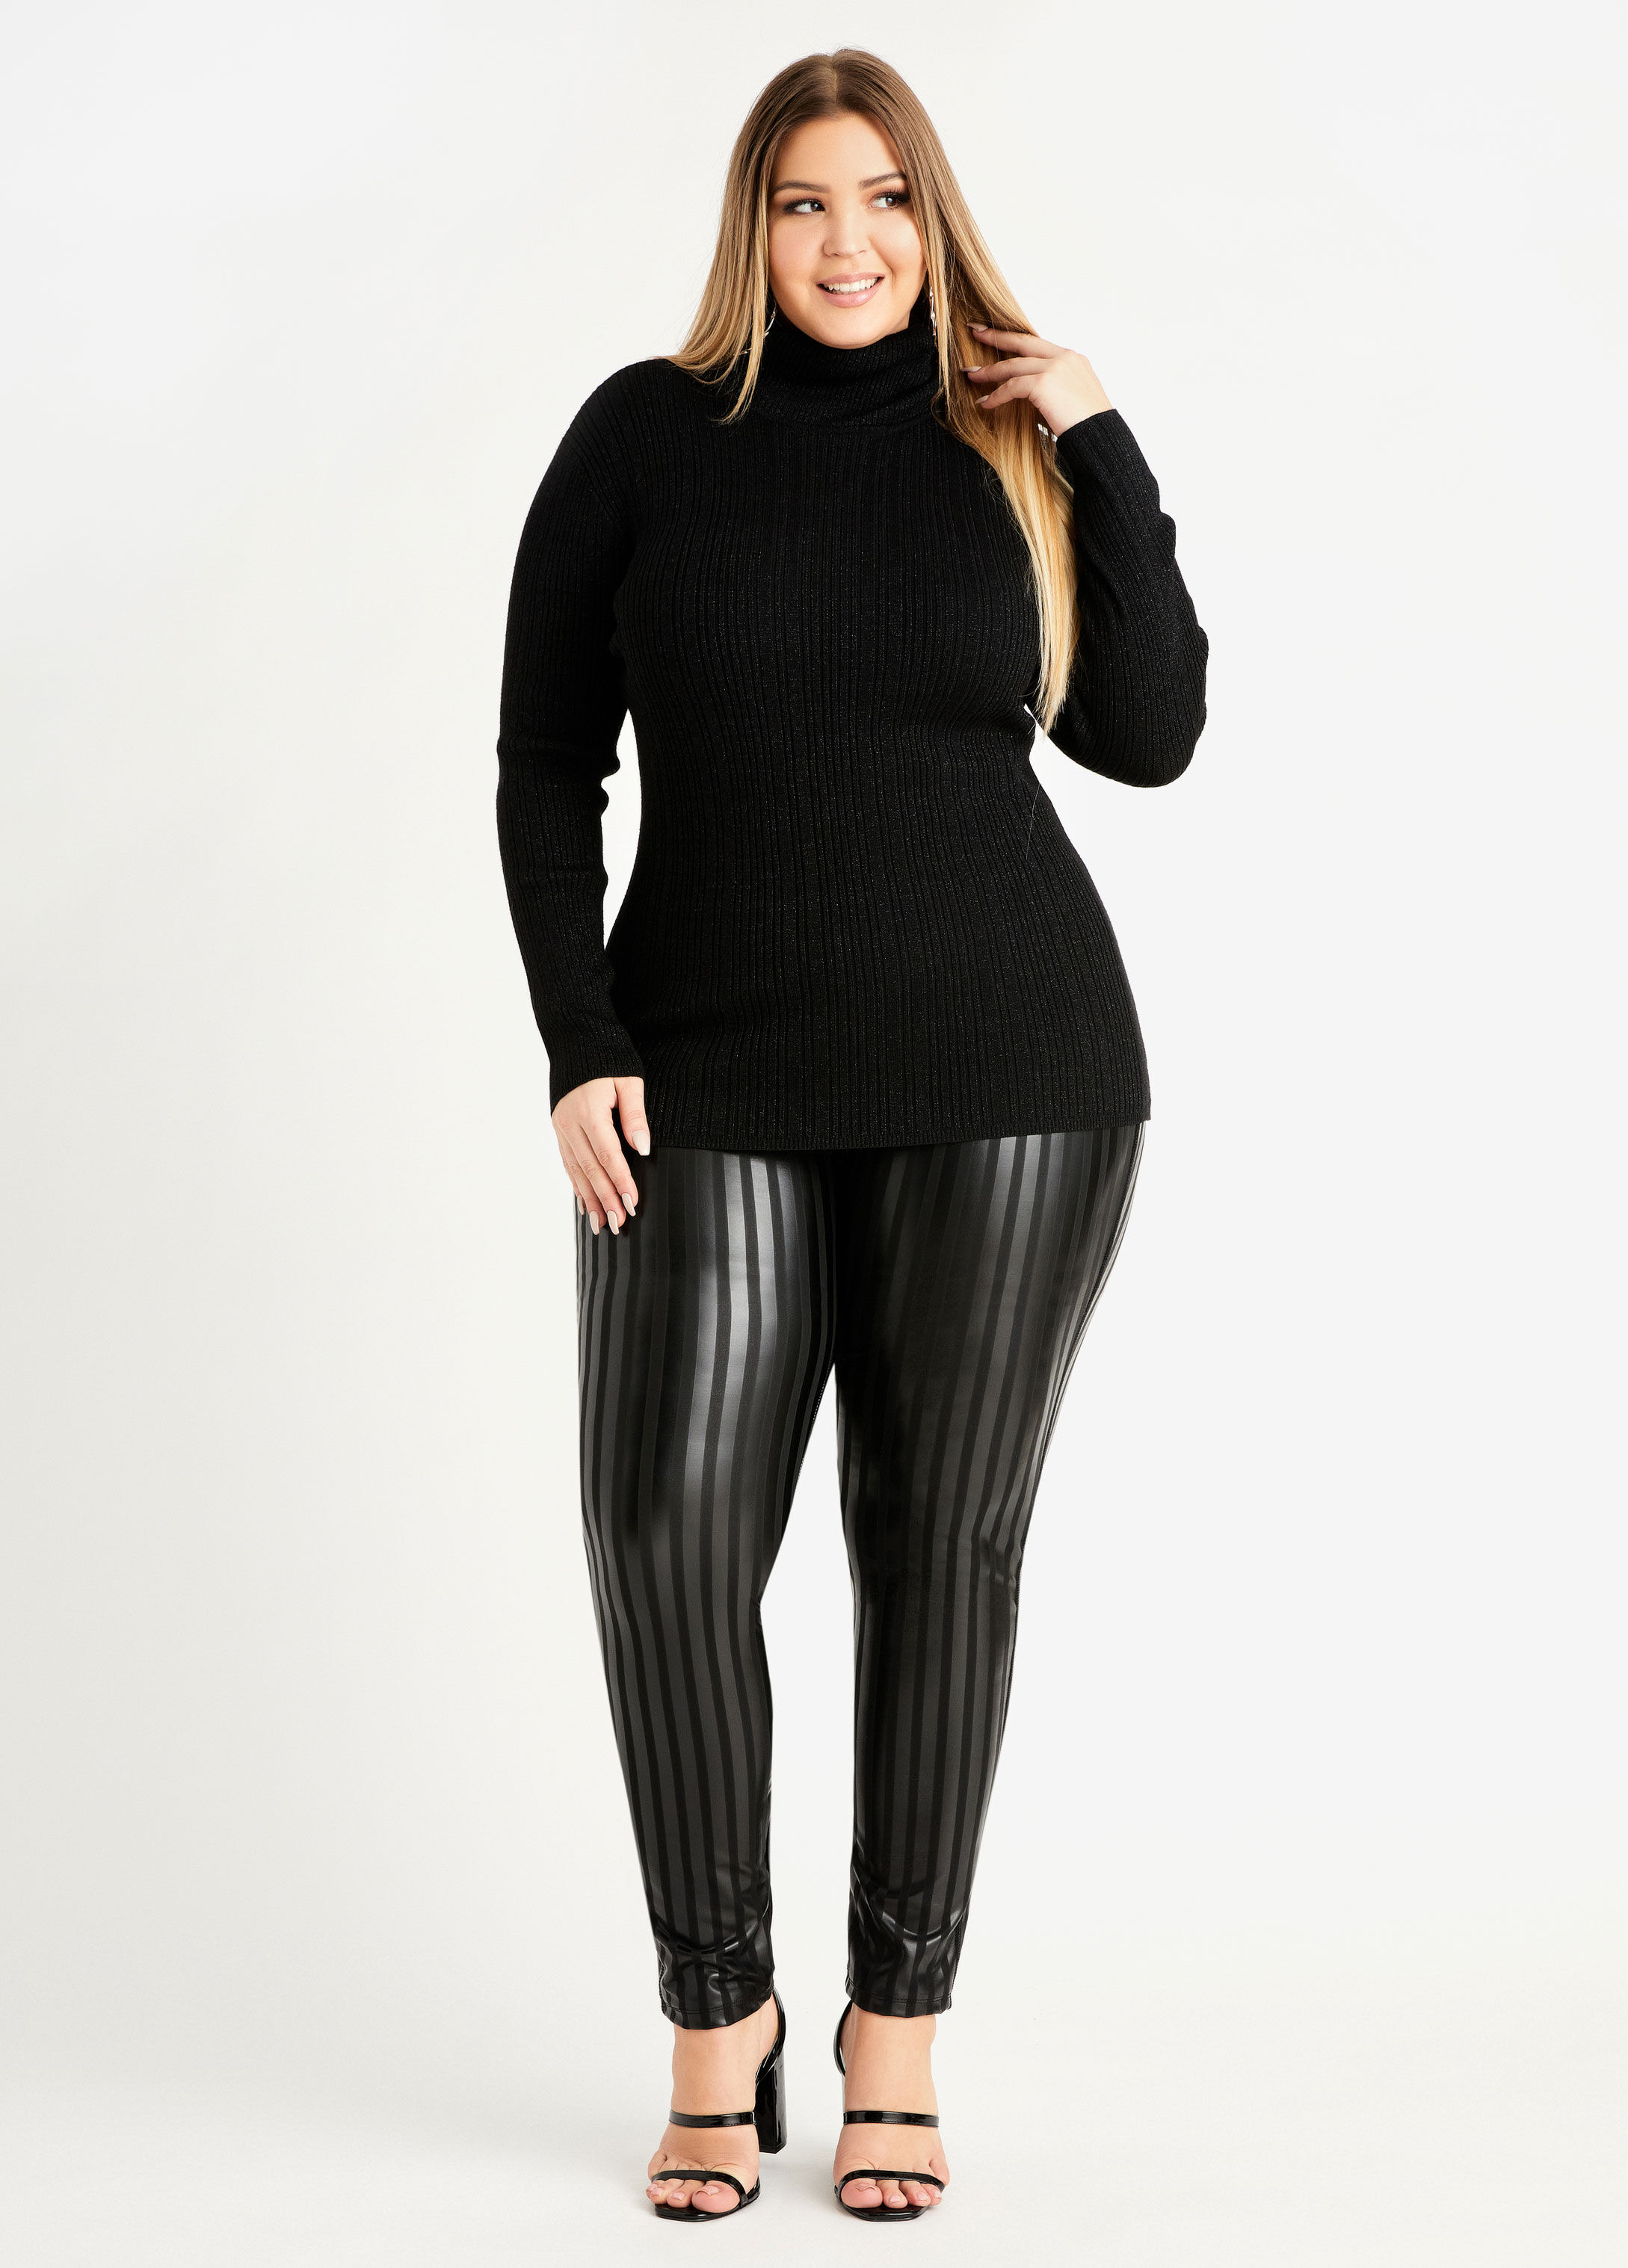 WornOnTV: Tamra's black faux leather leggings on The Real Housewives of  Orange County | Tamra Judge | Clothes and Wardrobe from TV